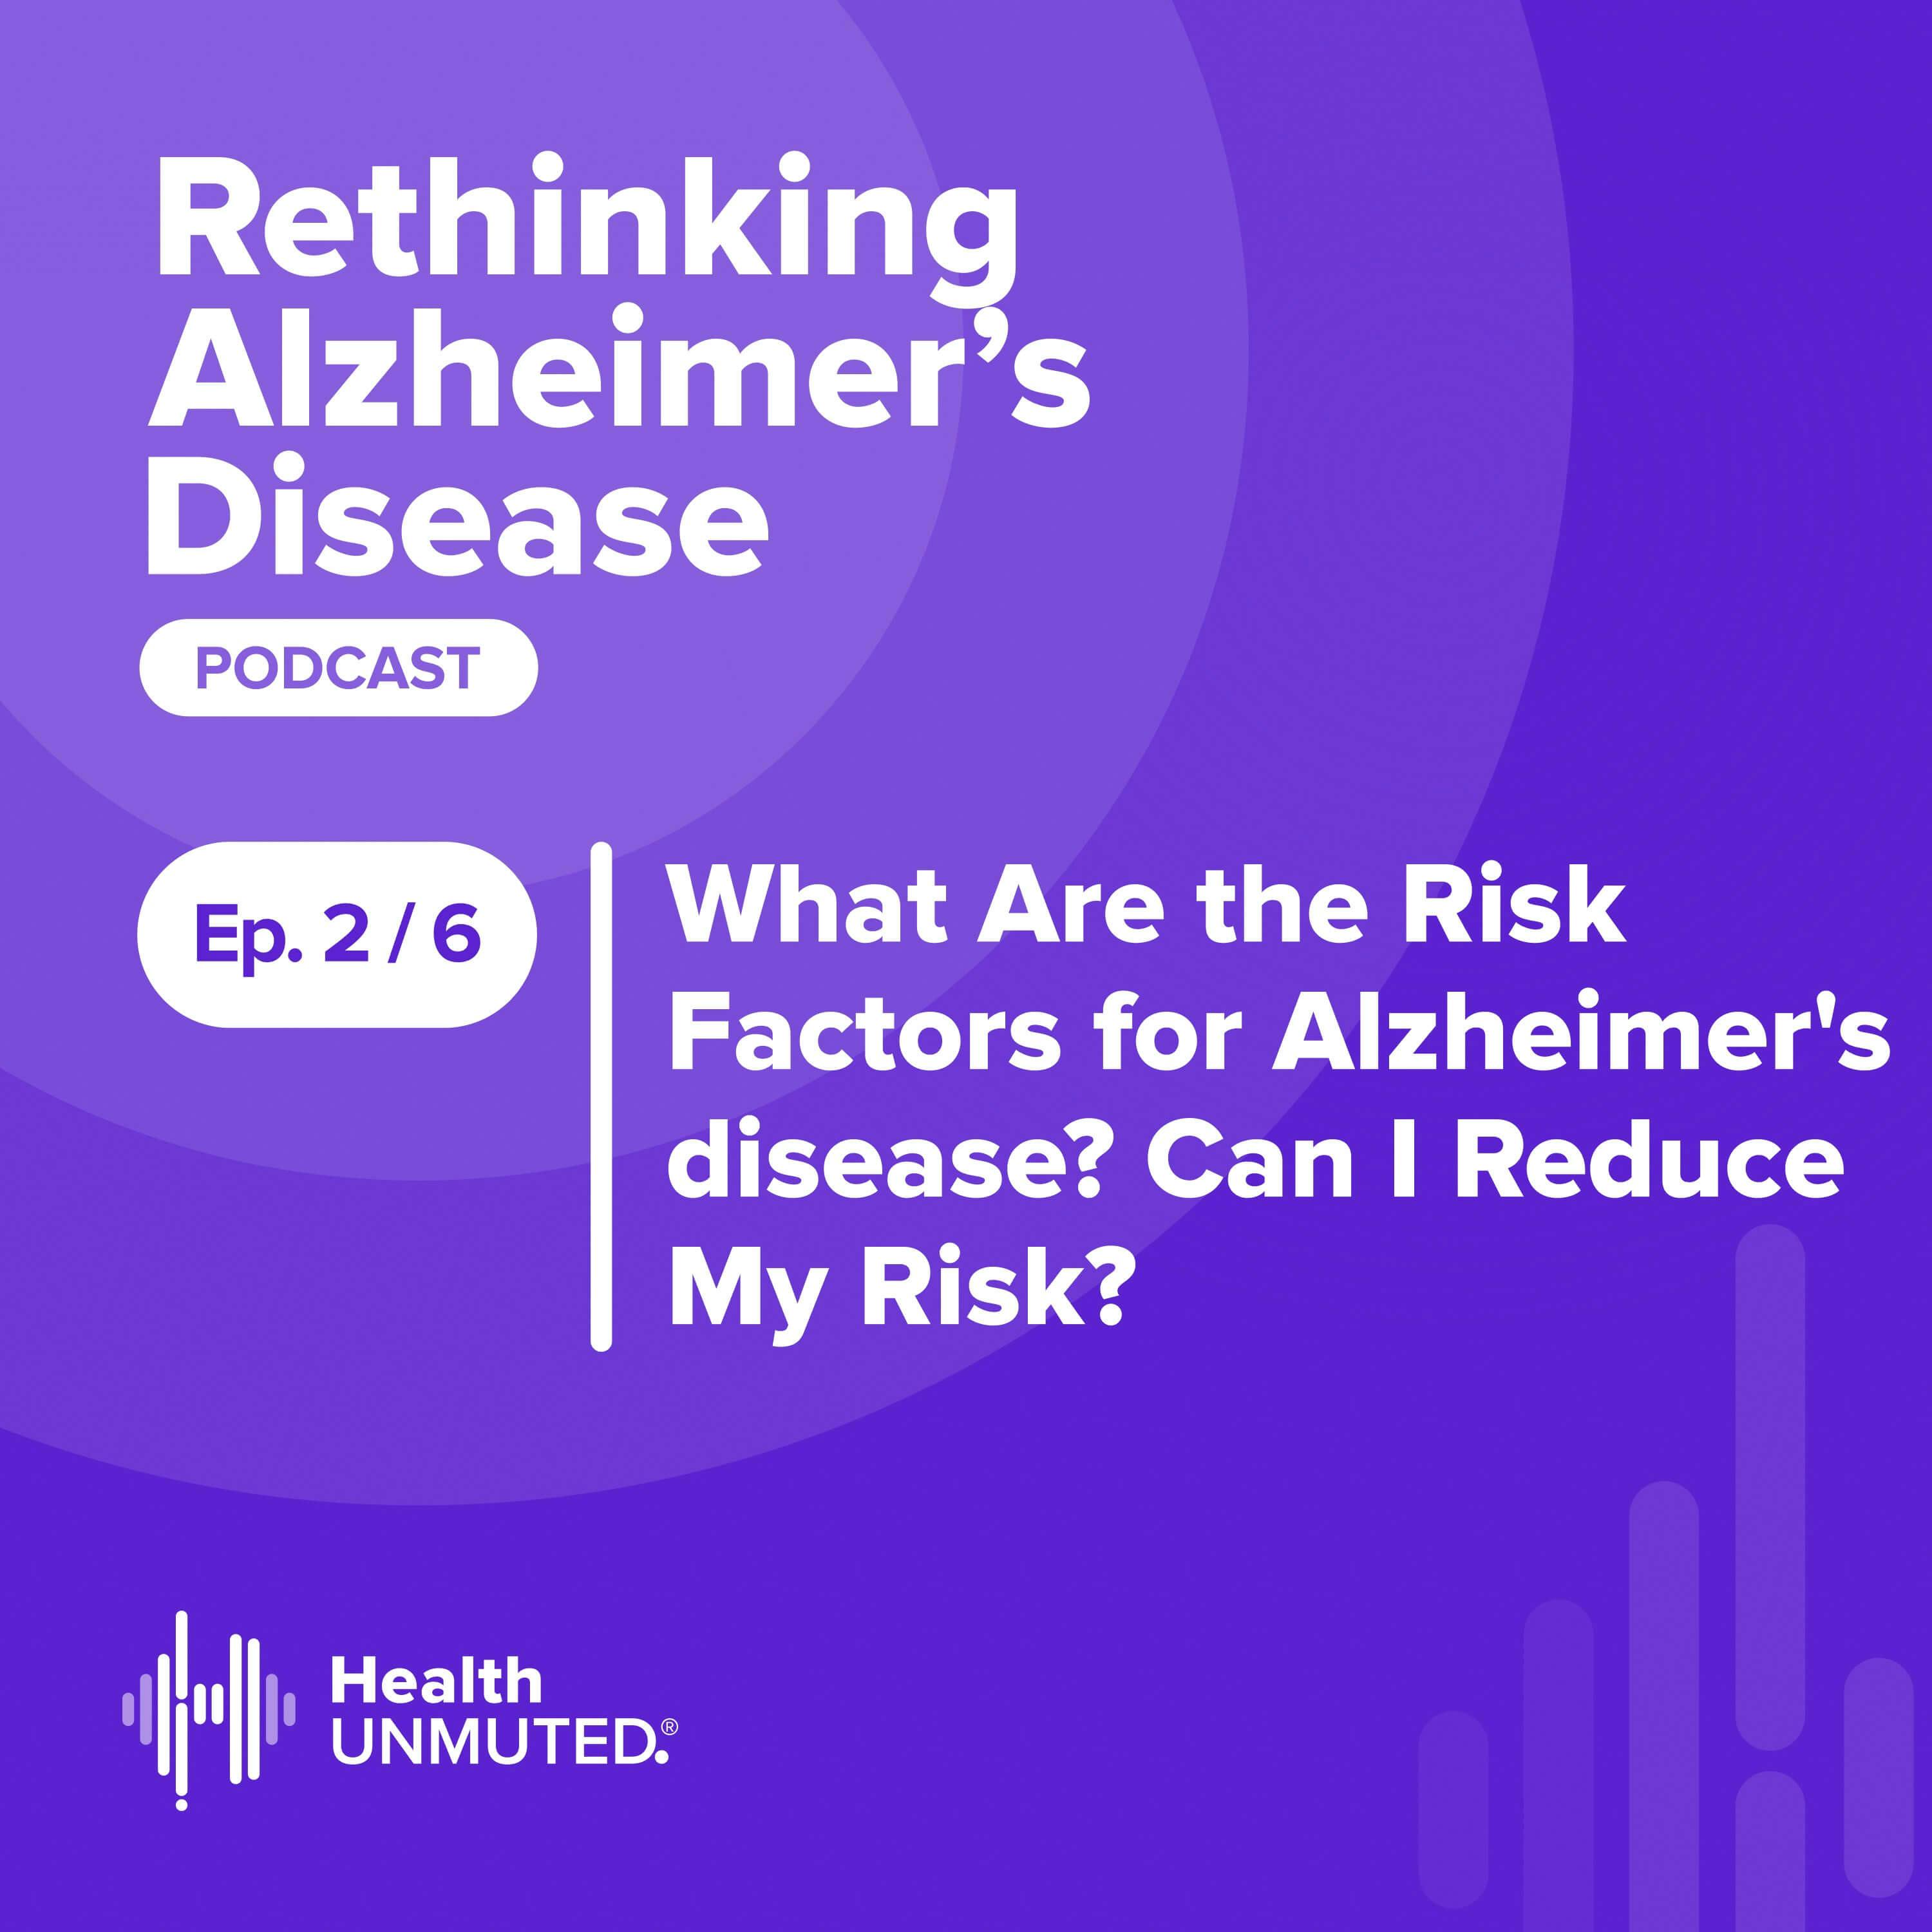 Ep 2: What Are the Risk Factors for Alzheimer’s disease? Can I Reduce My Risk?